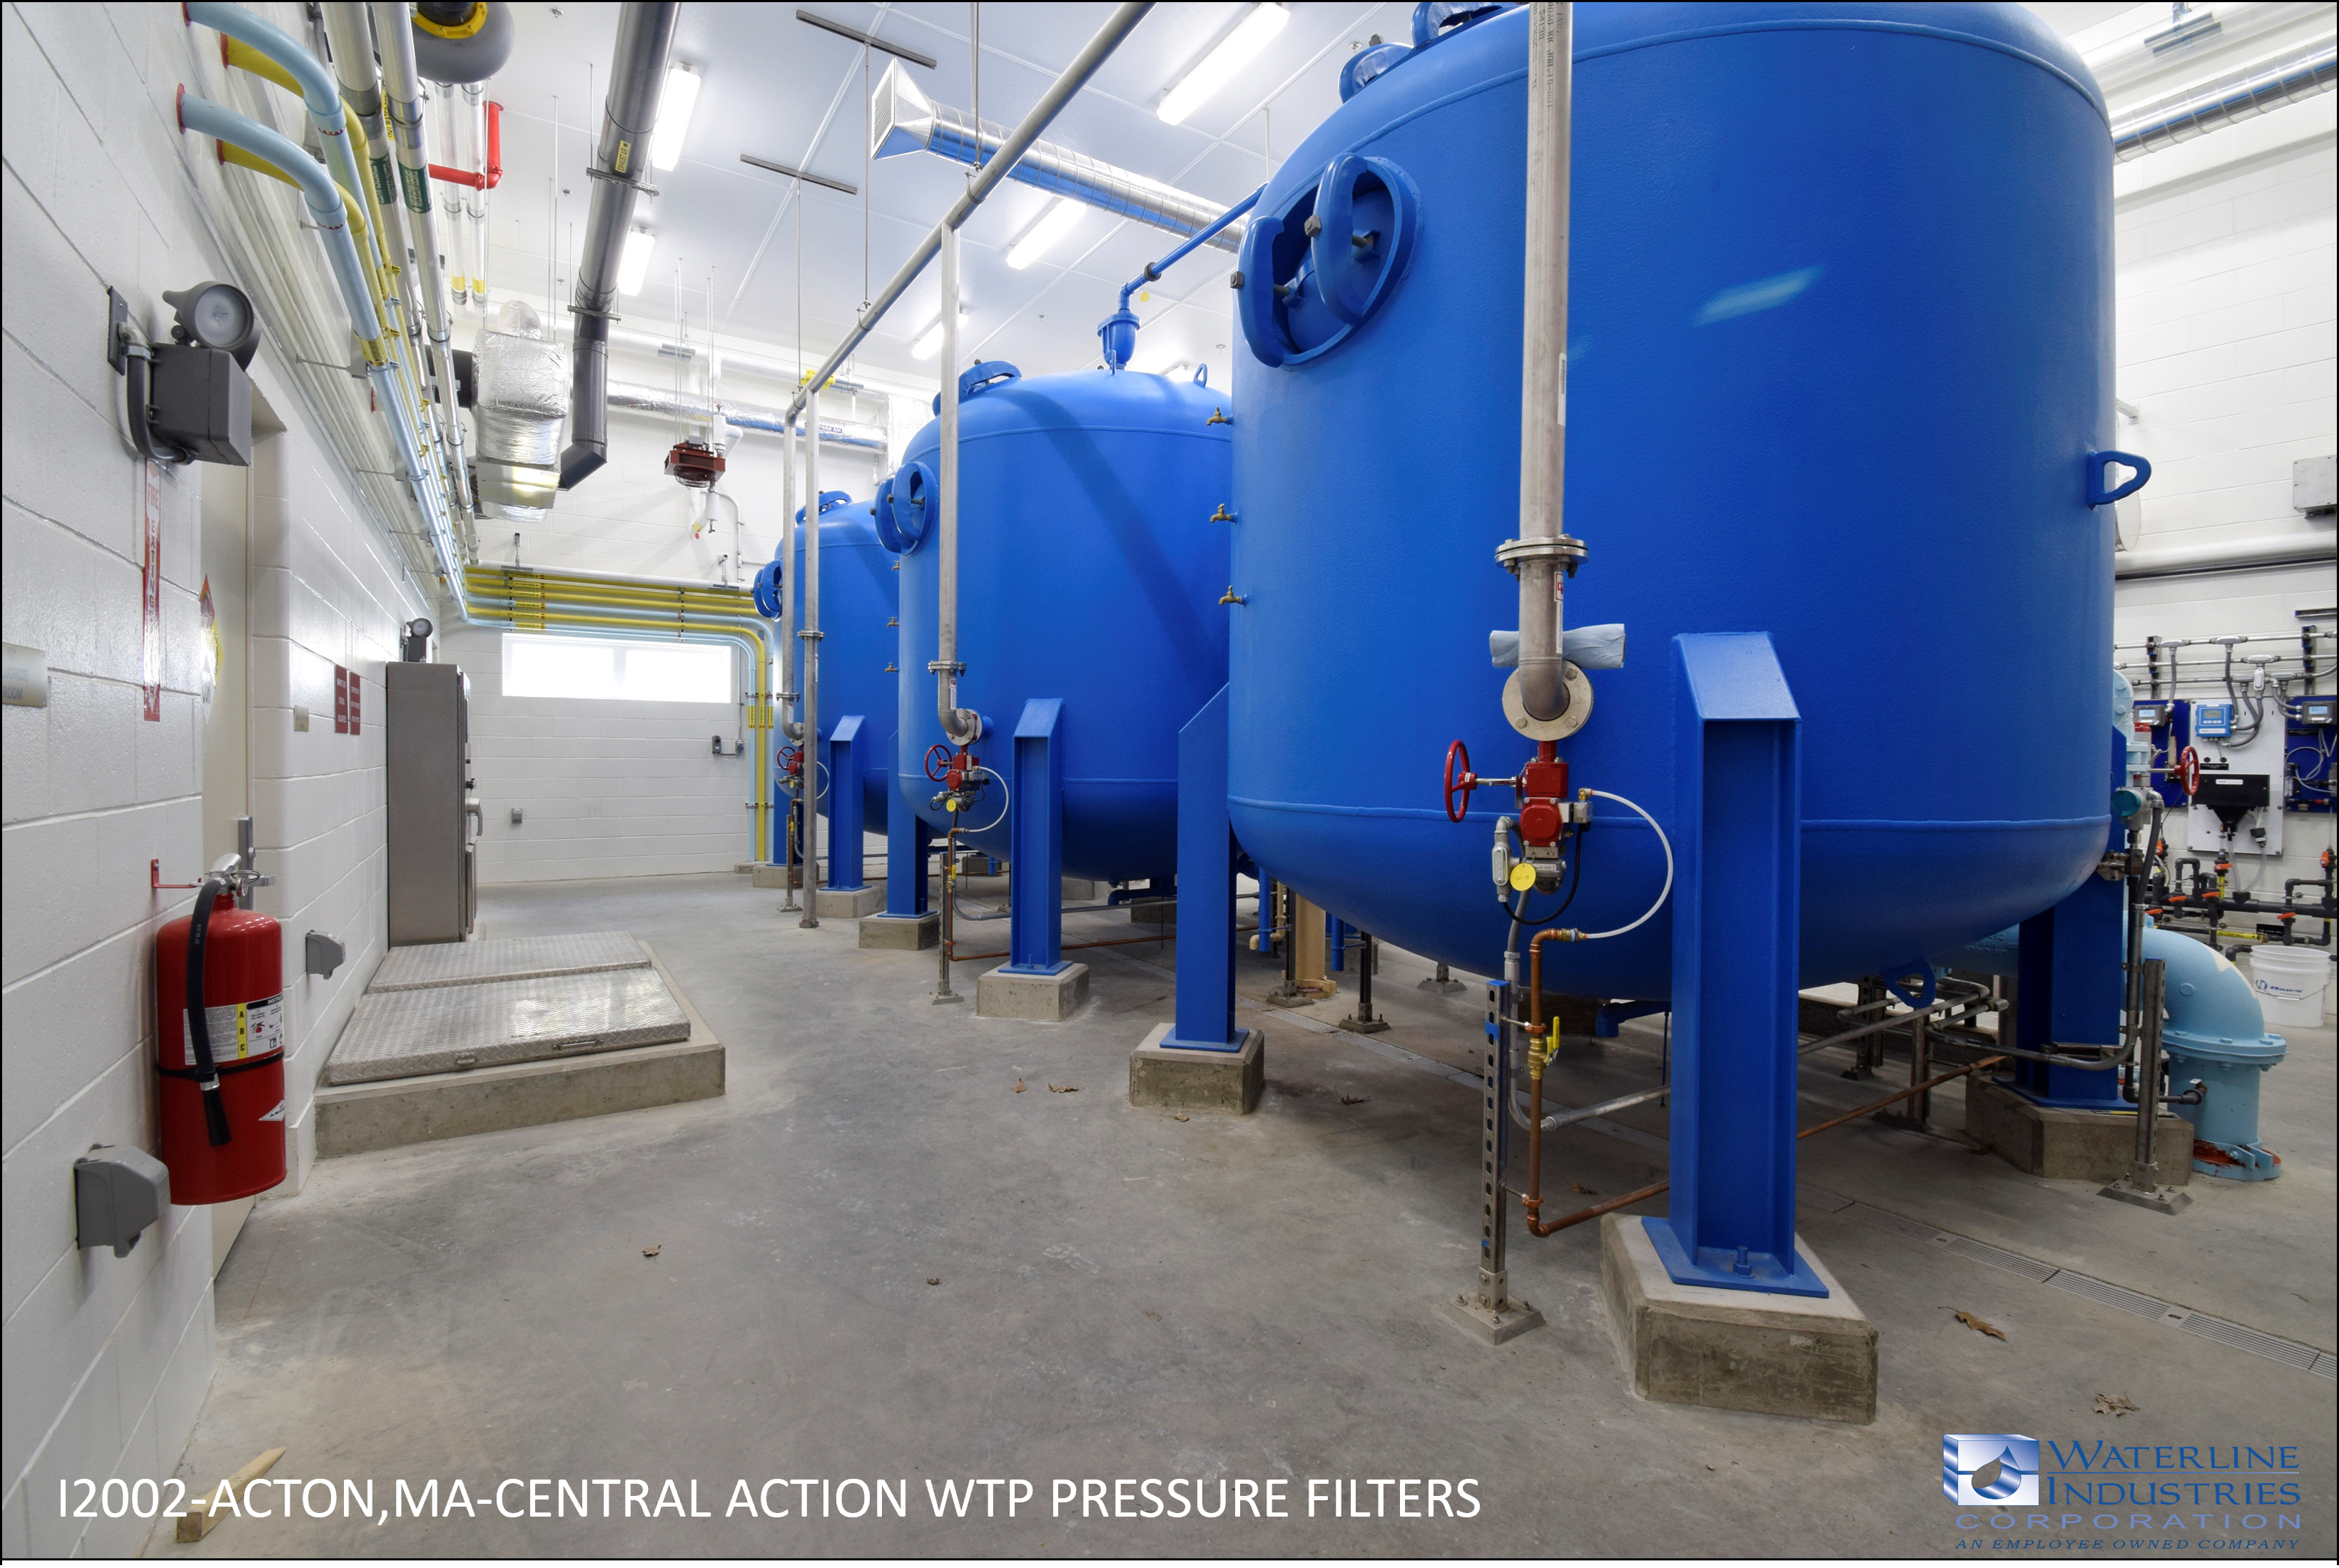 I2002-ACTON,MA-CENTRAL ACTION WTP PRESSURE FILTERS